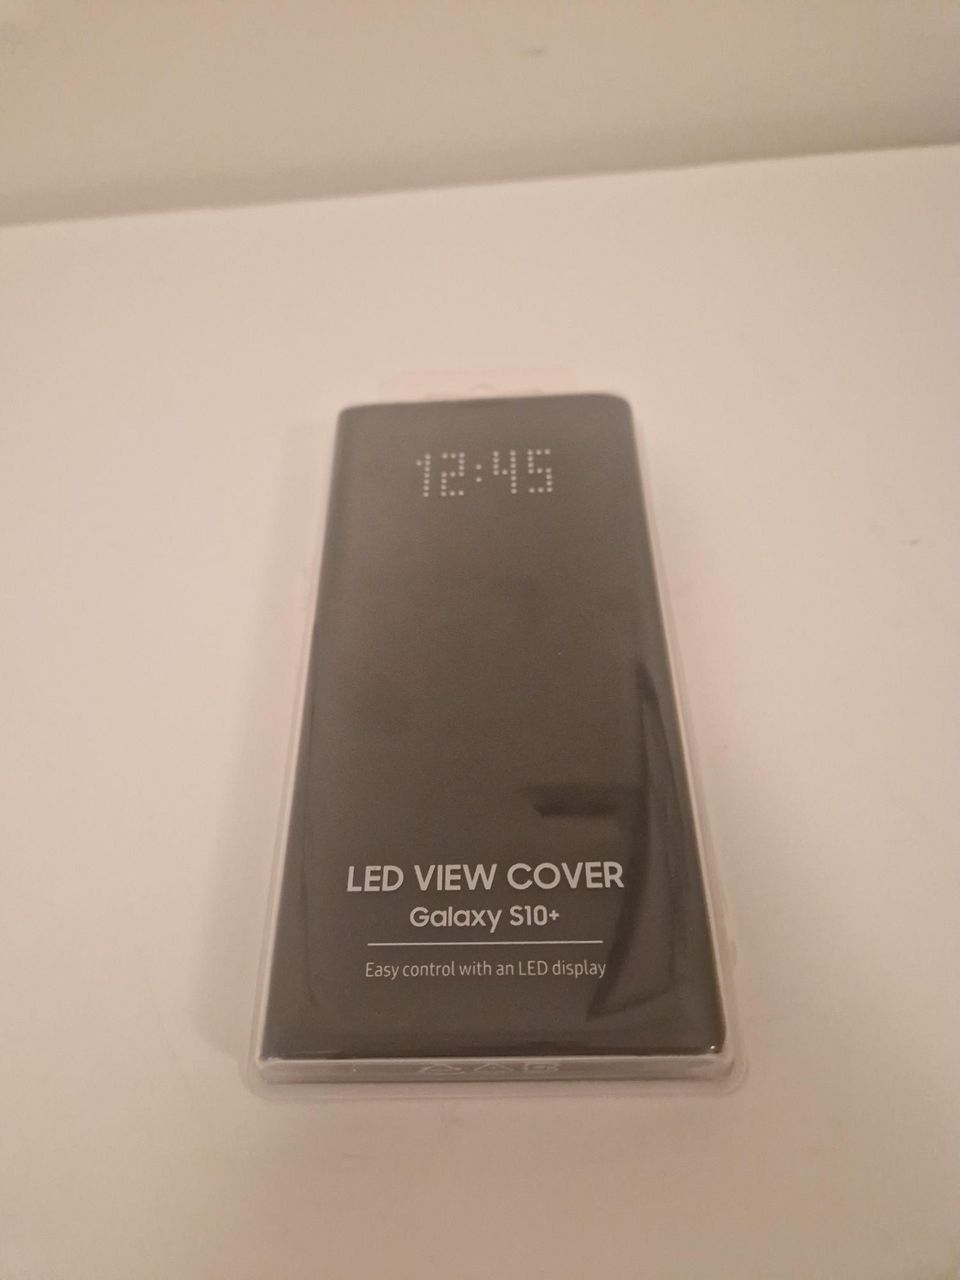 Uusi Samsung LED View cover, Galaxy S10+